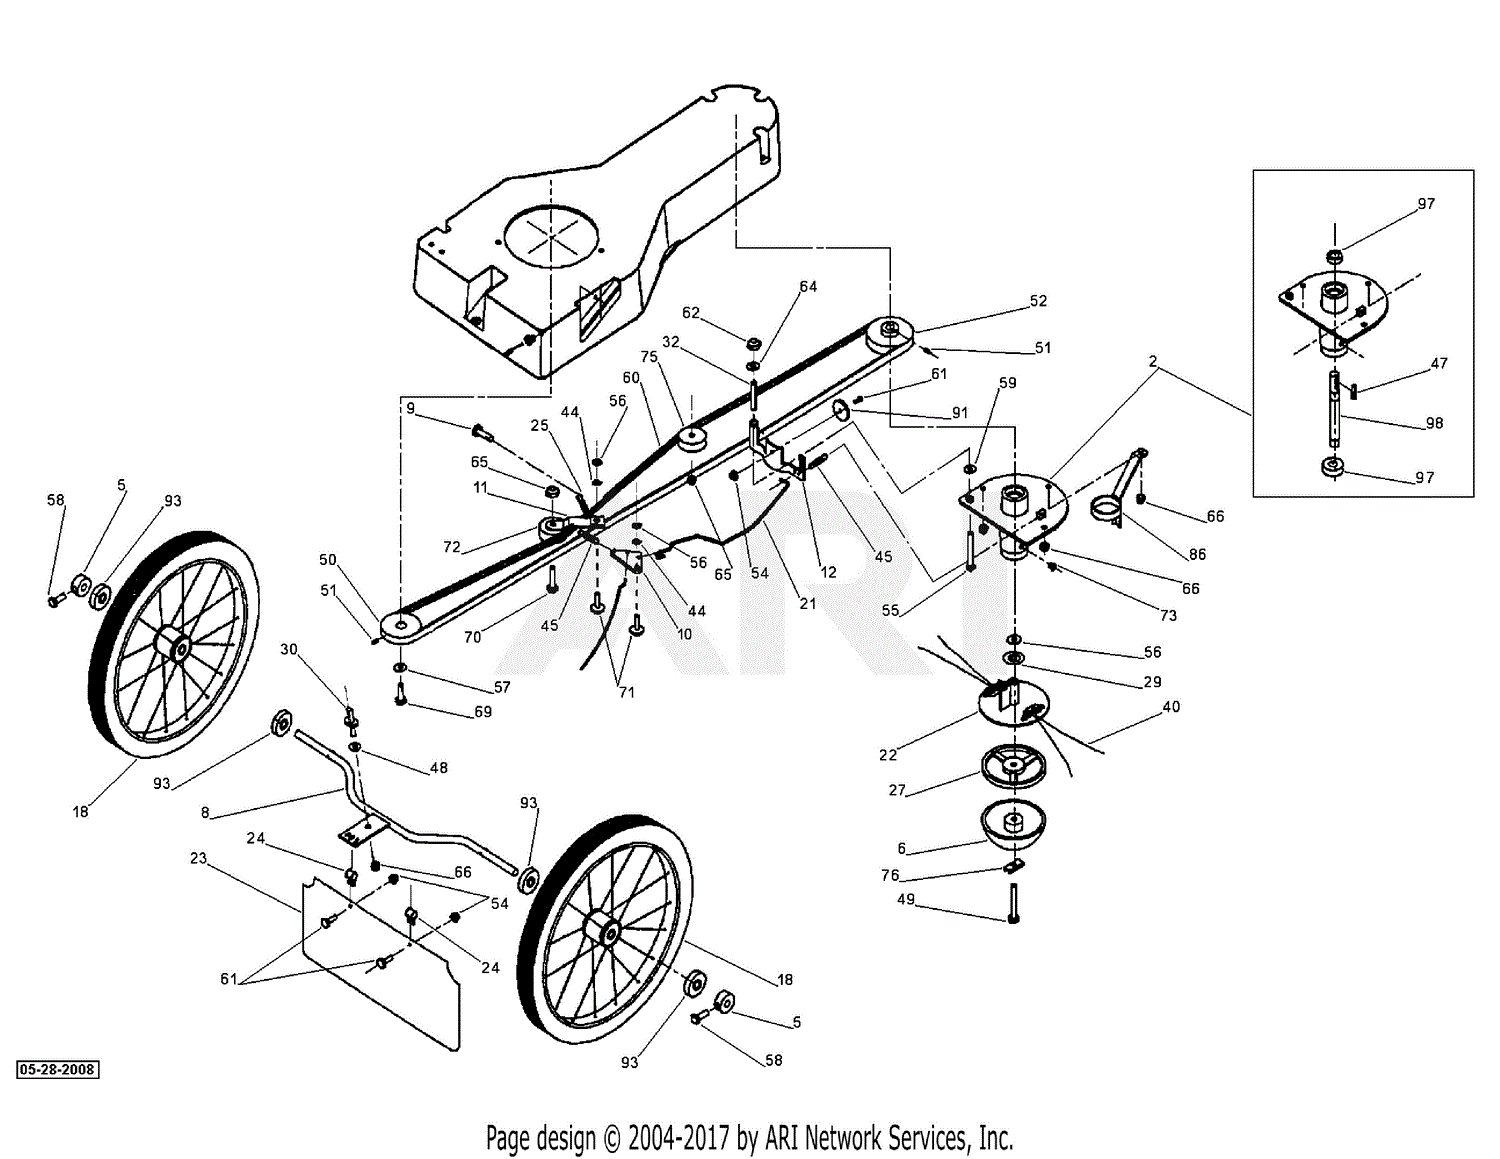 DR Power TR0 Pro ( LMF ) Parts Diagram for Axle and Mowball